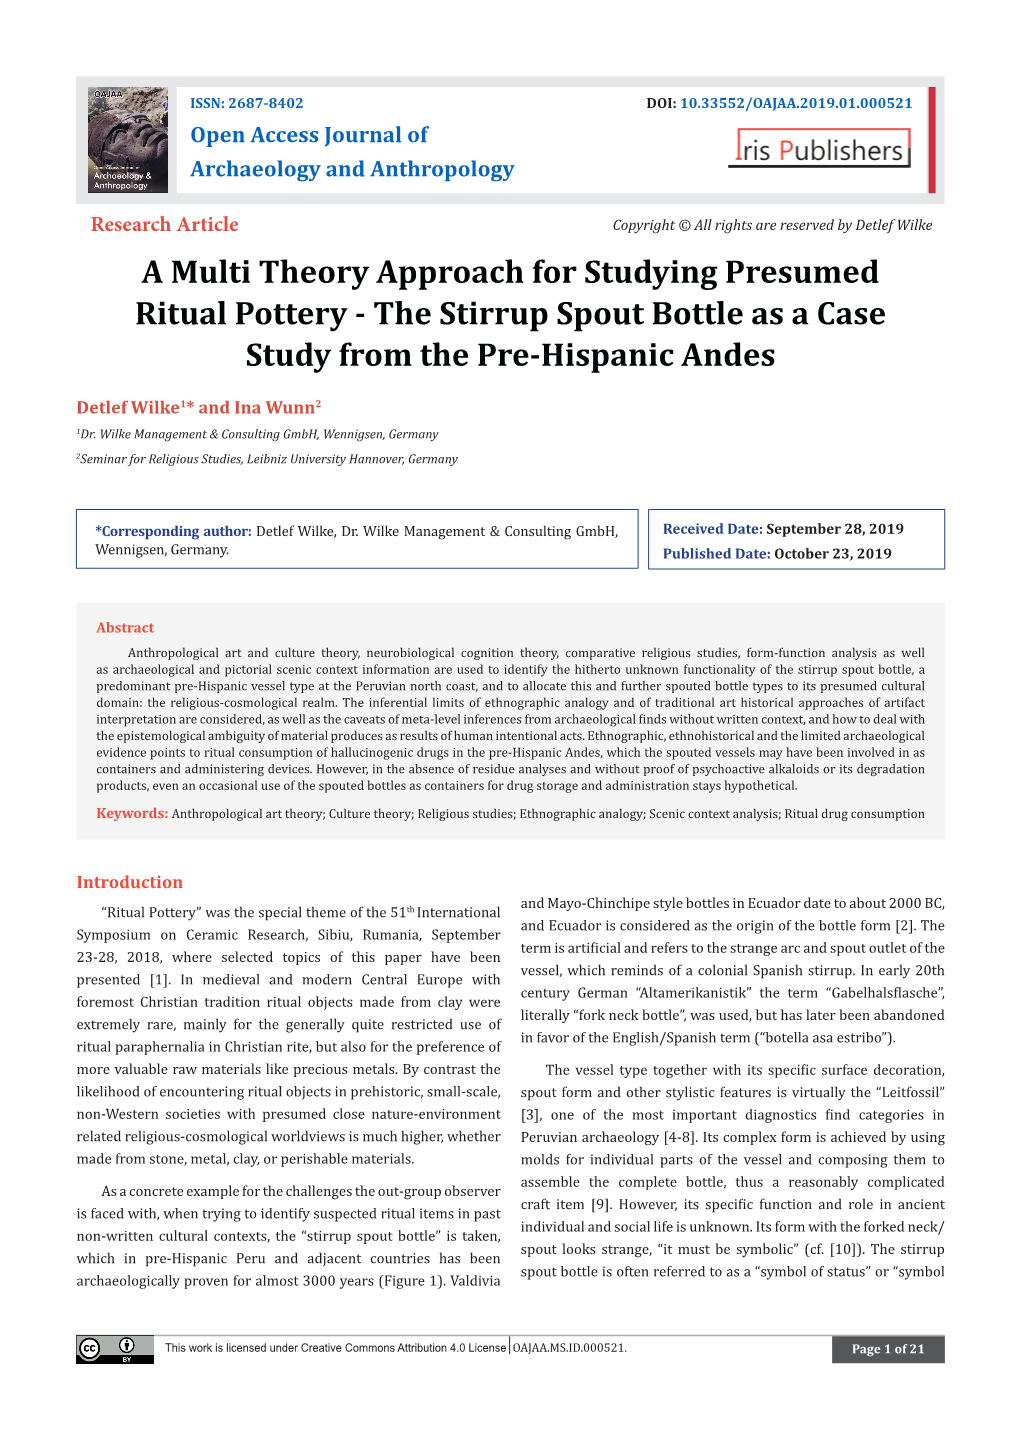 A Multi Theory Approach for Studying Presumed Ritual Pottery the Stirrup